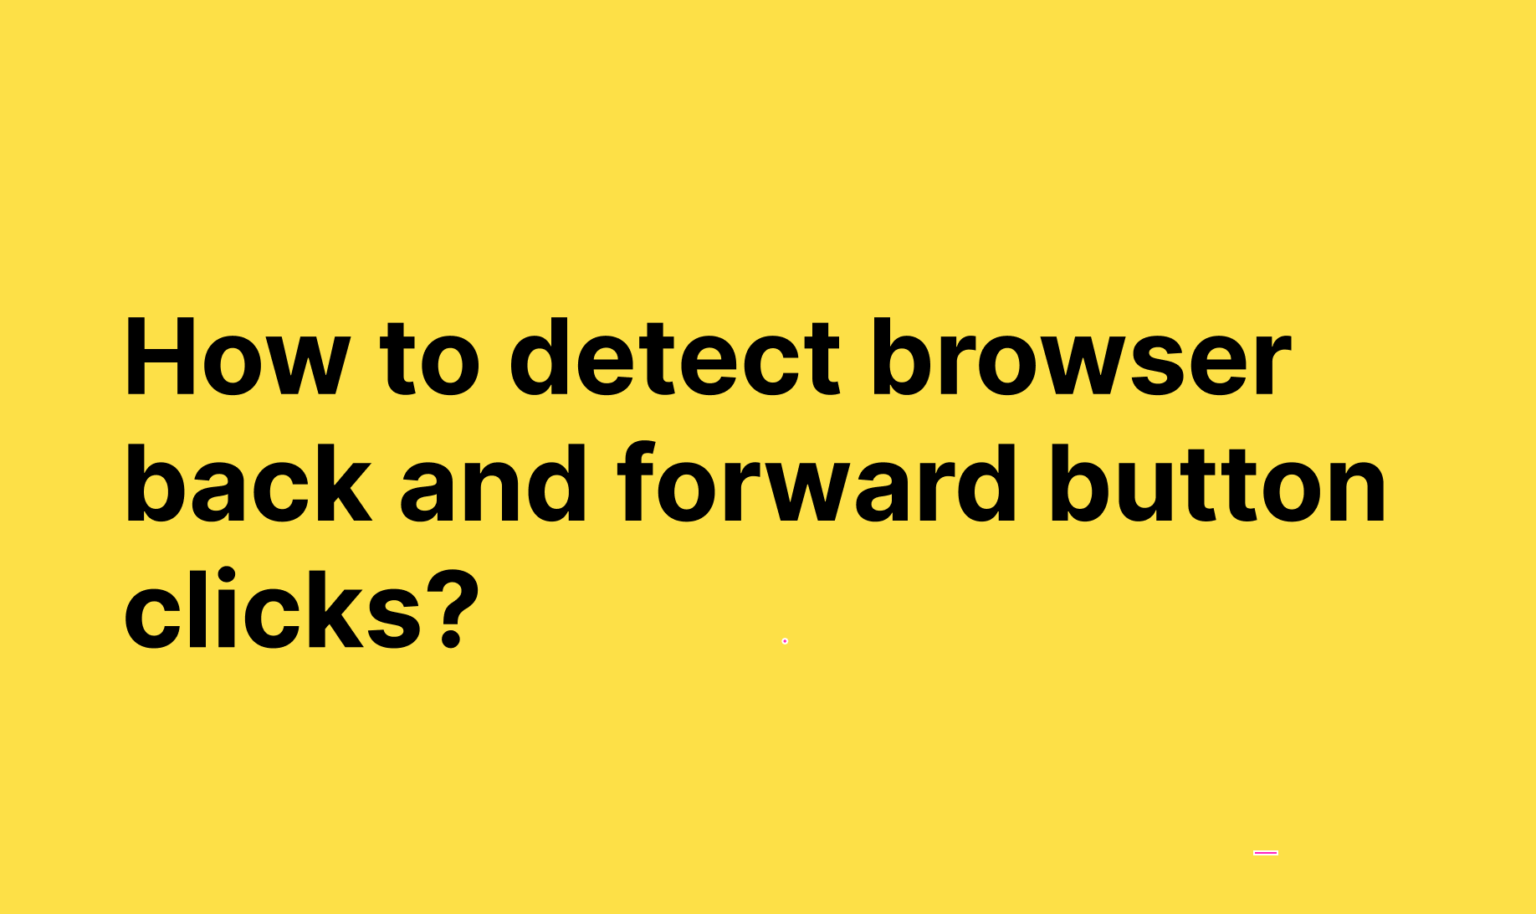 How to detect browser back and forward button clicks in Javascript?